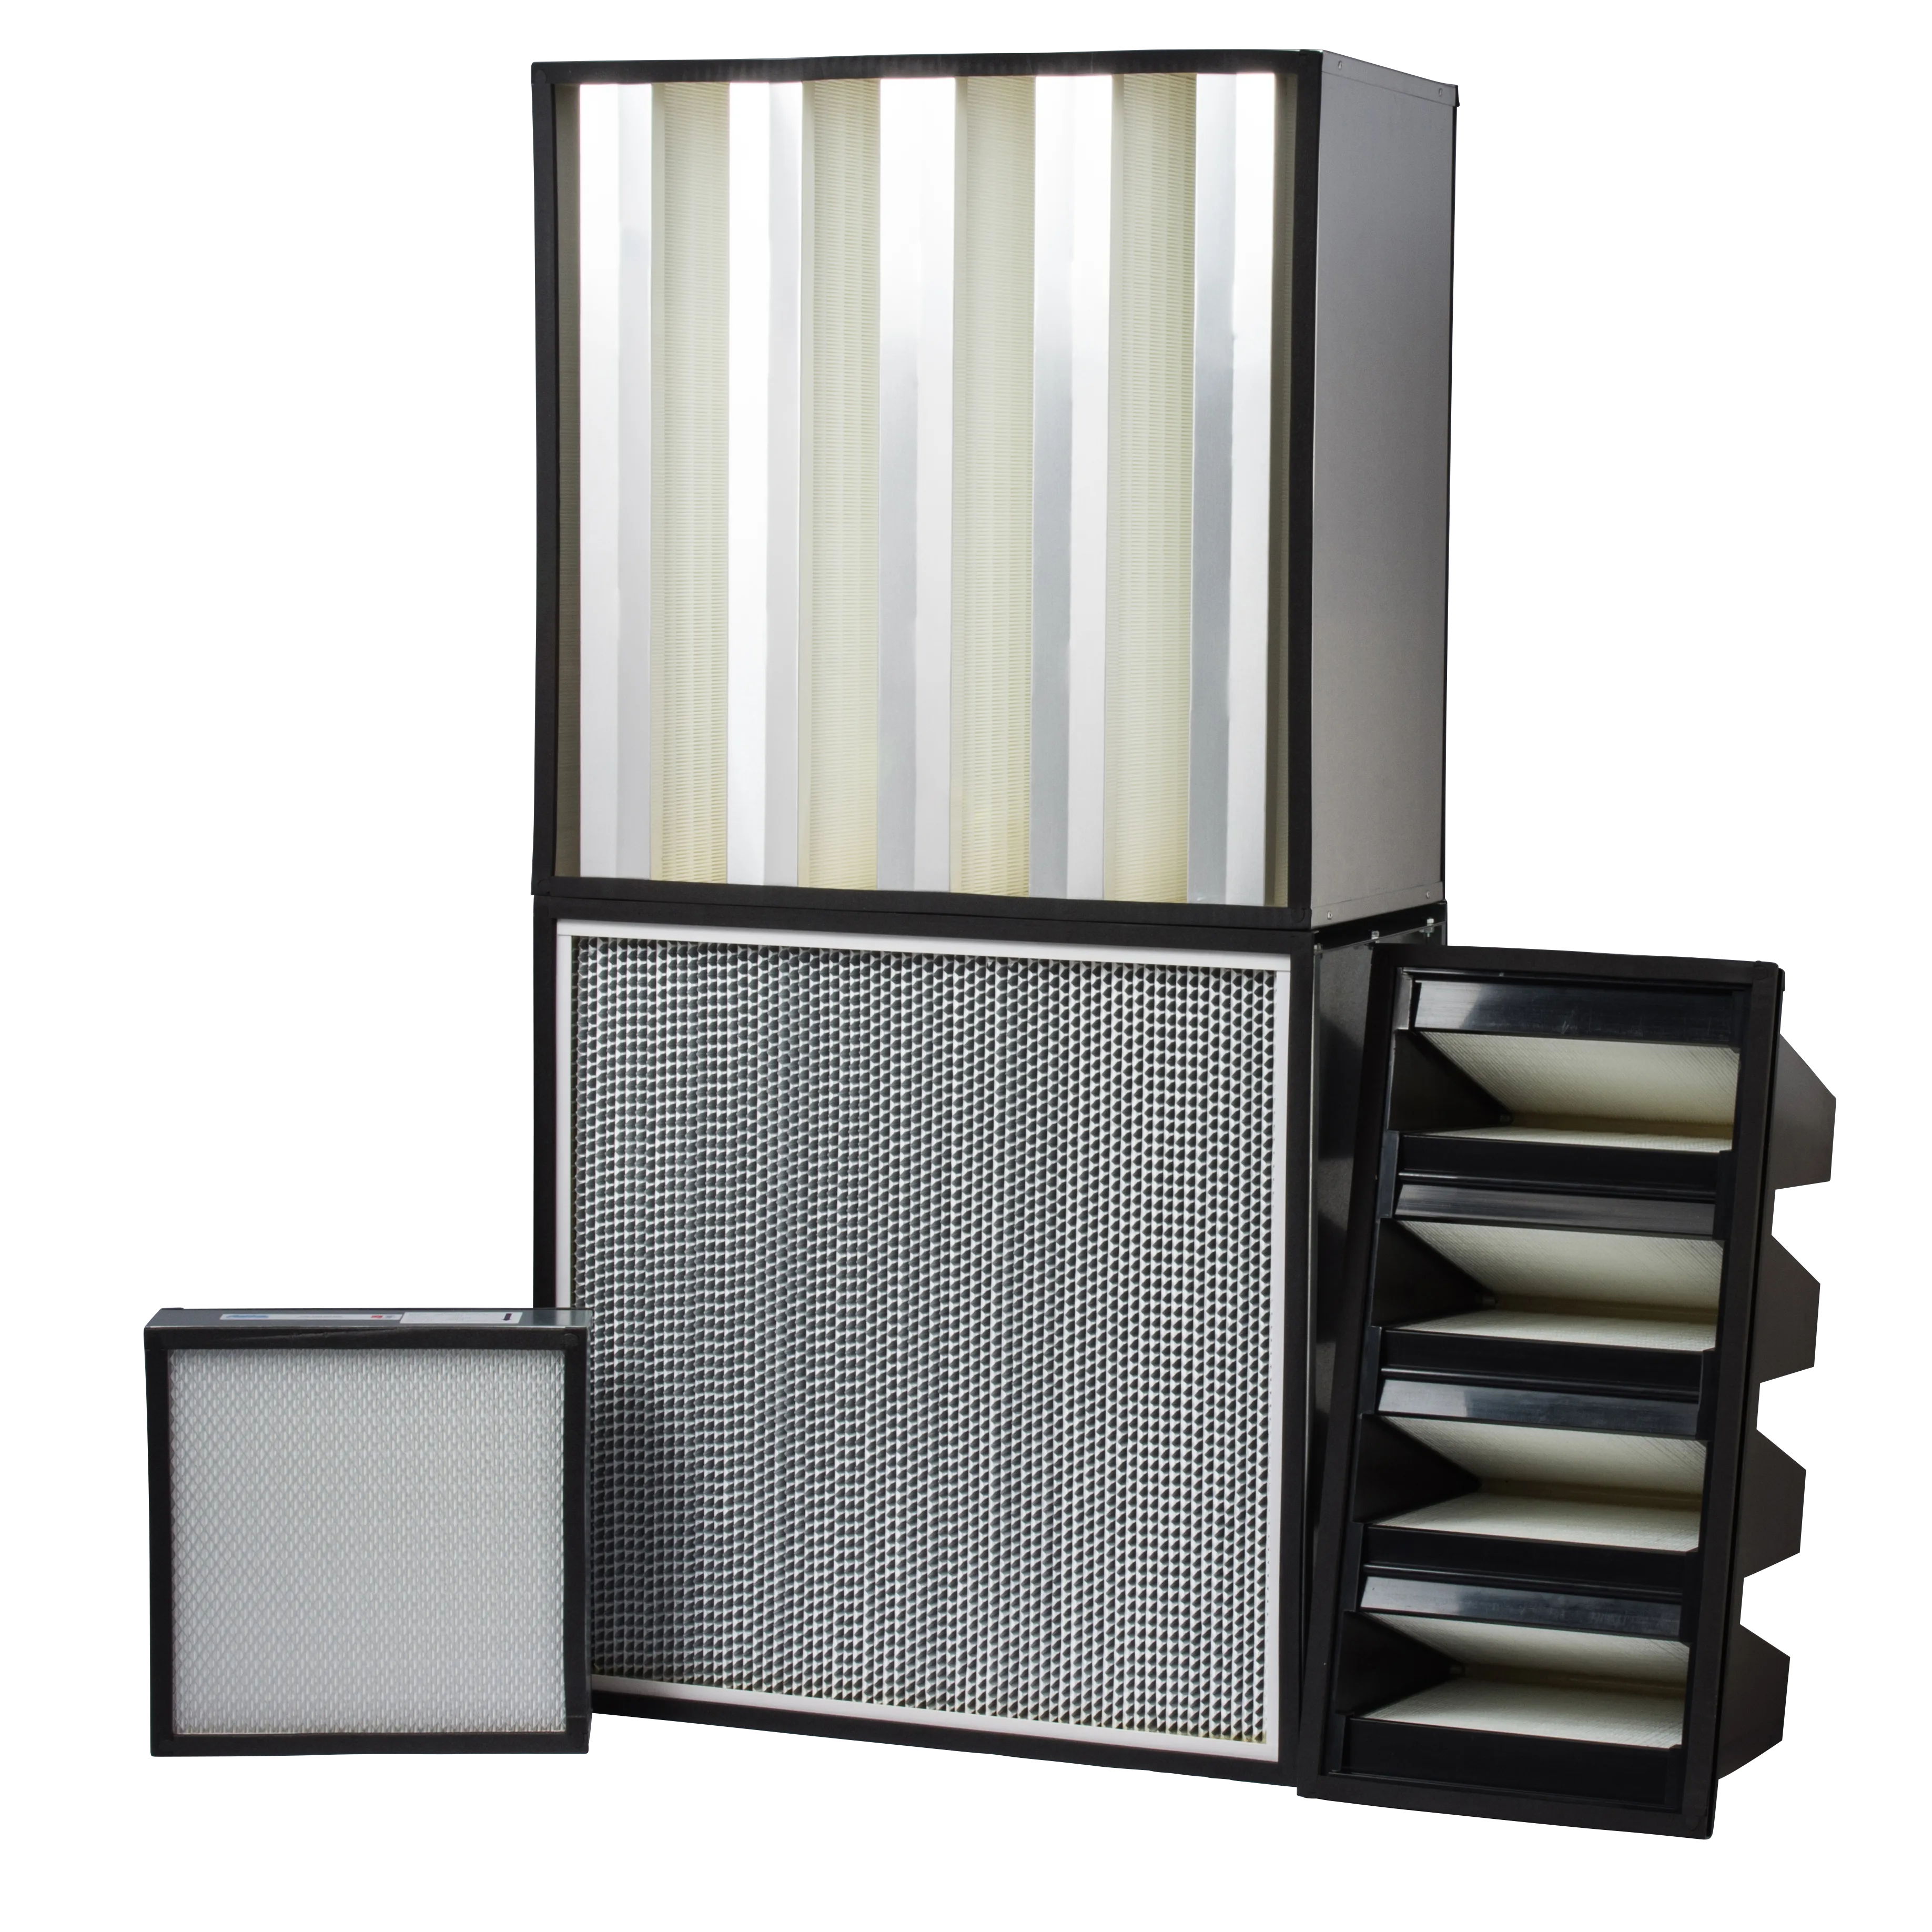 HEPA Filter Collection